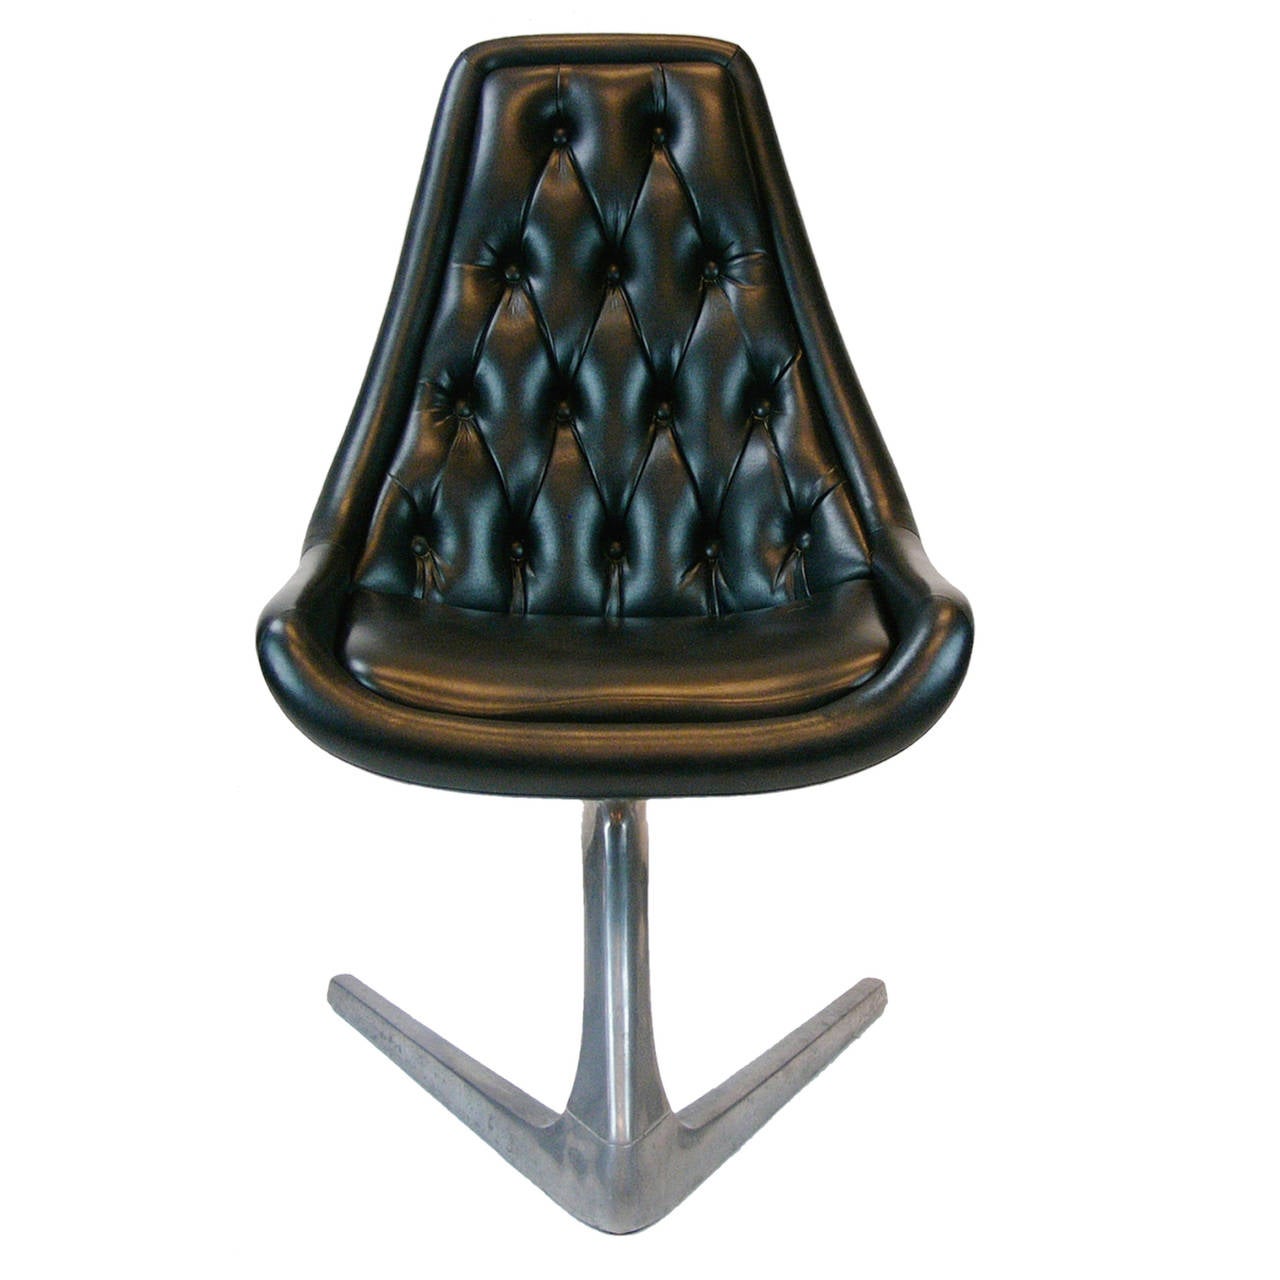 A sleek 'Star Trek'' Sculpta chair that works well on it's own or could be used to expand a set of dining chairs.